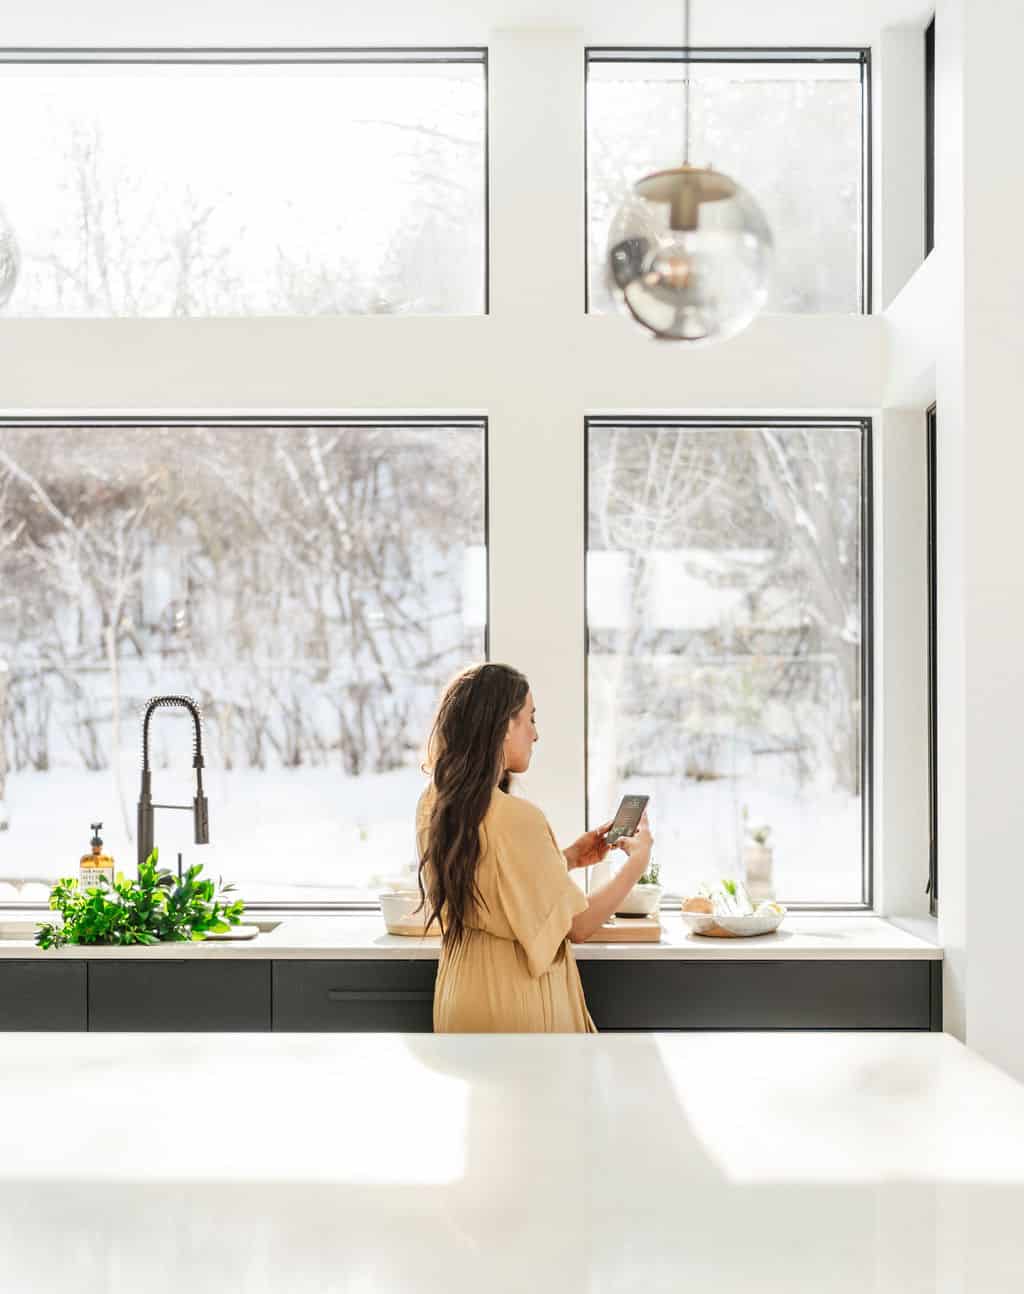 Maria, a food blogger, in a kitchen with gorgeous floor to ceiling windows.